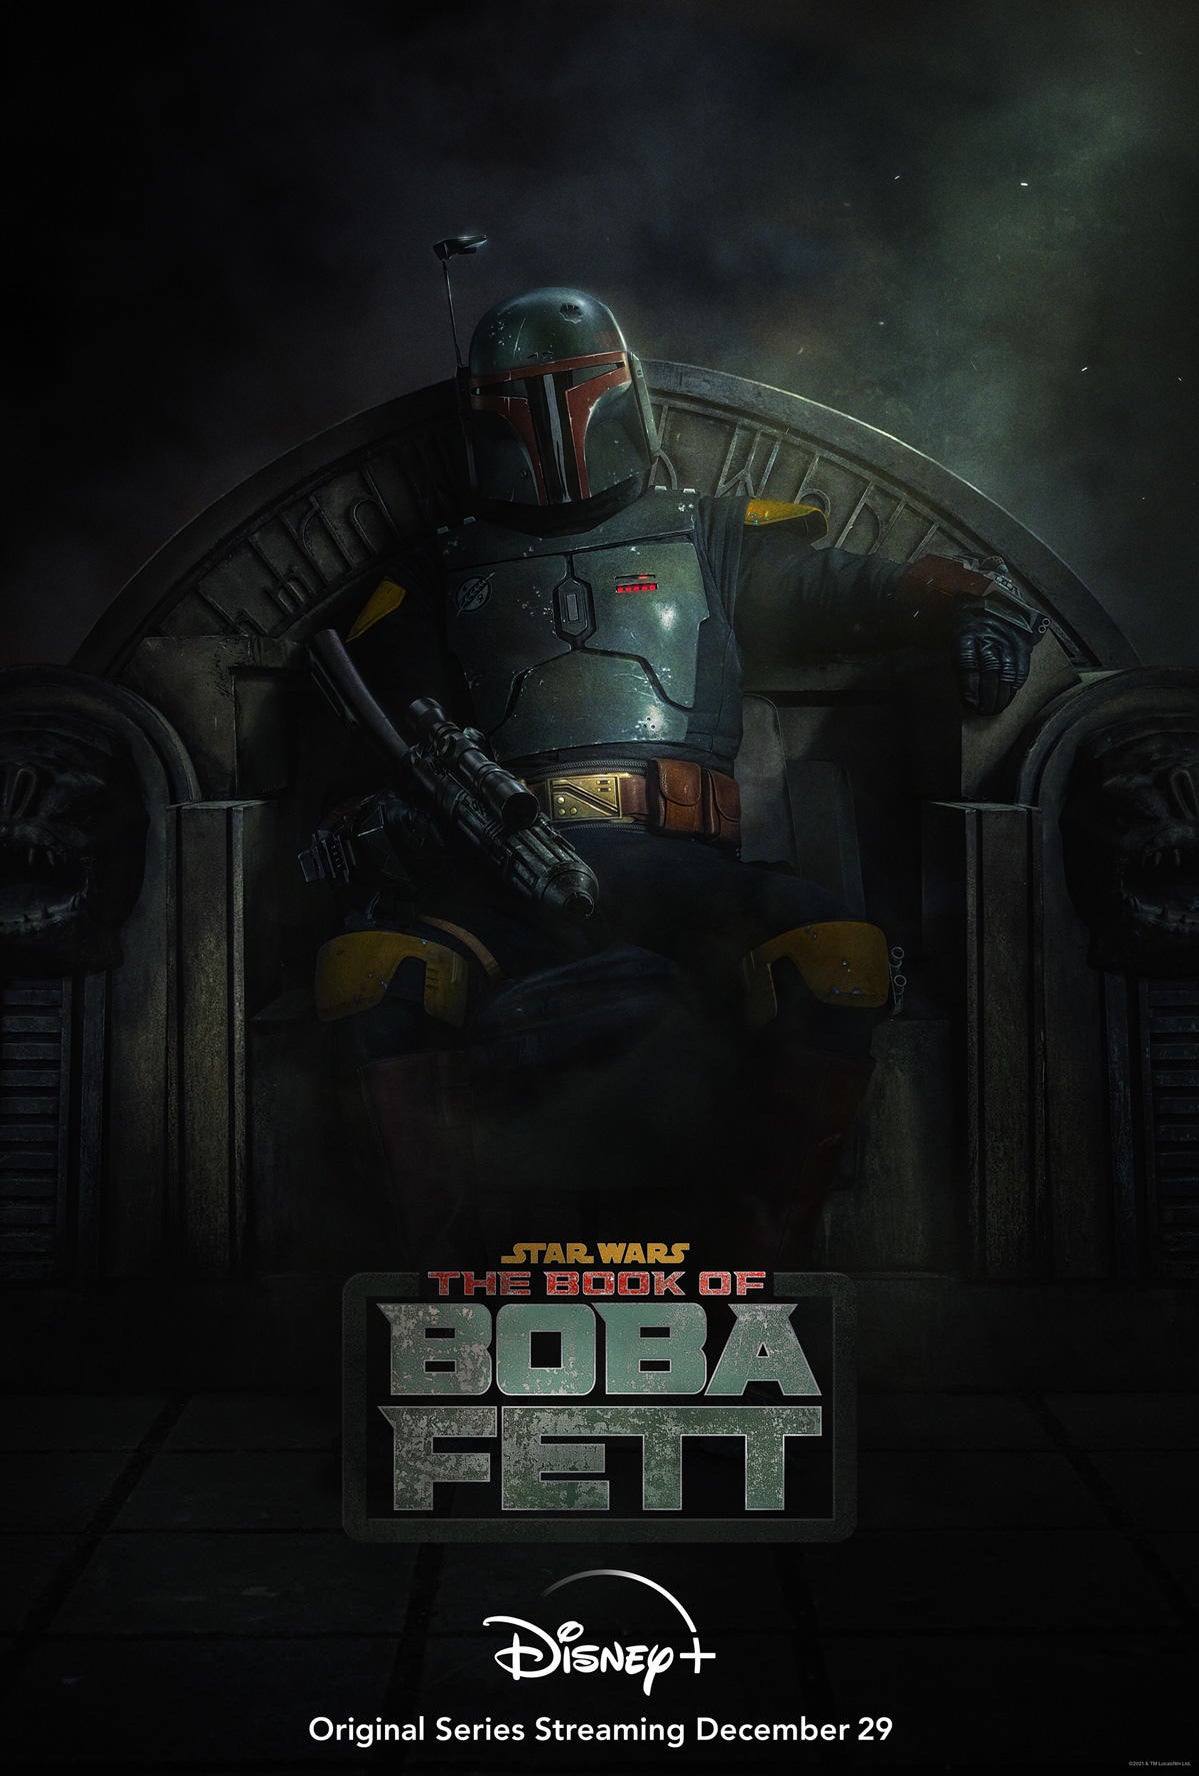 Star Wars: The Book of Boba Fett Premiere Date Revealed on New Poster